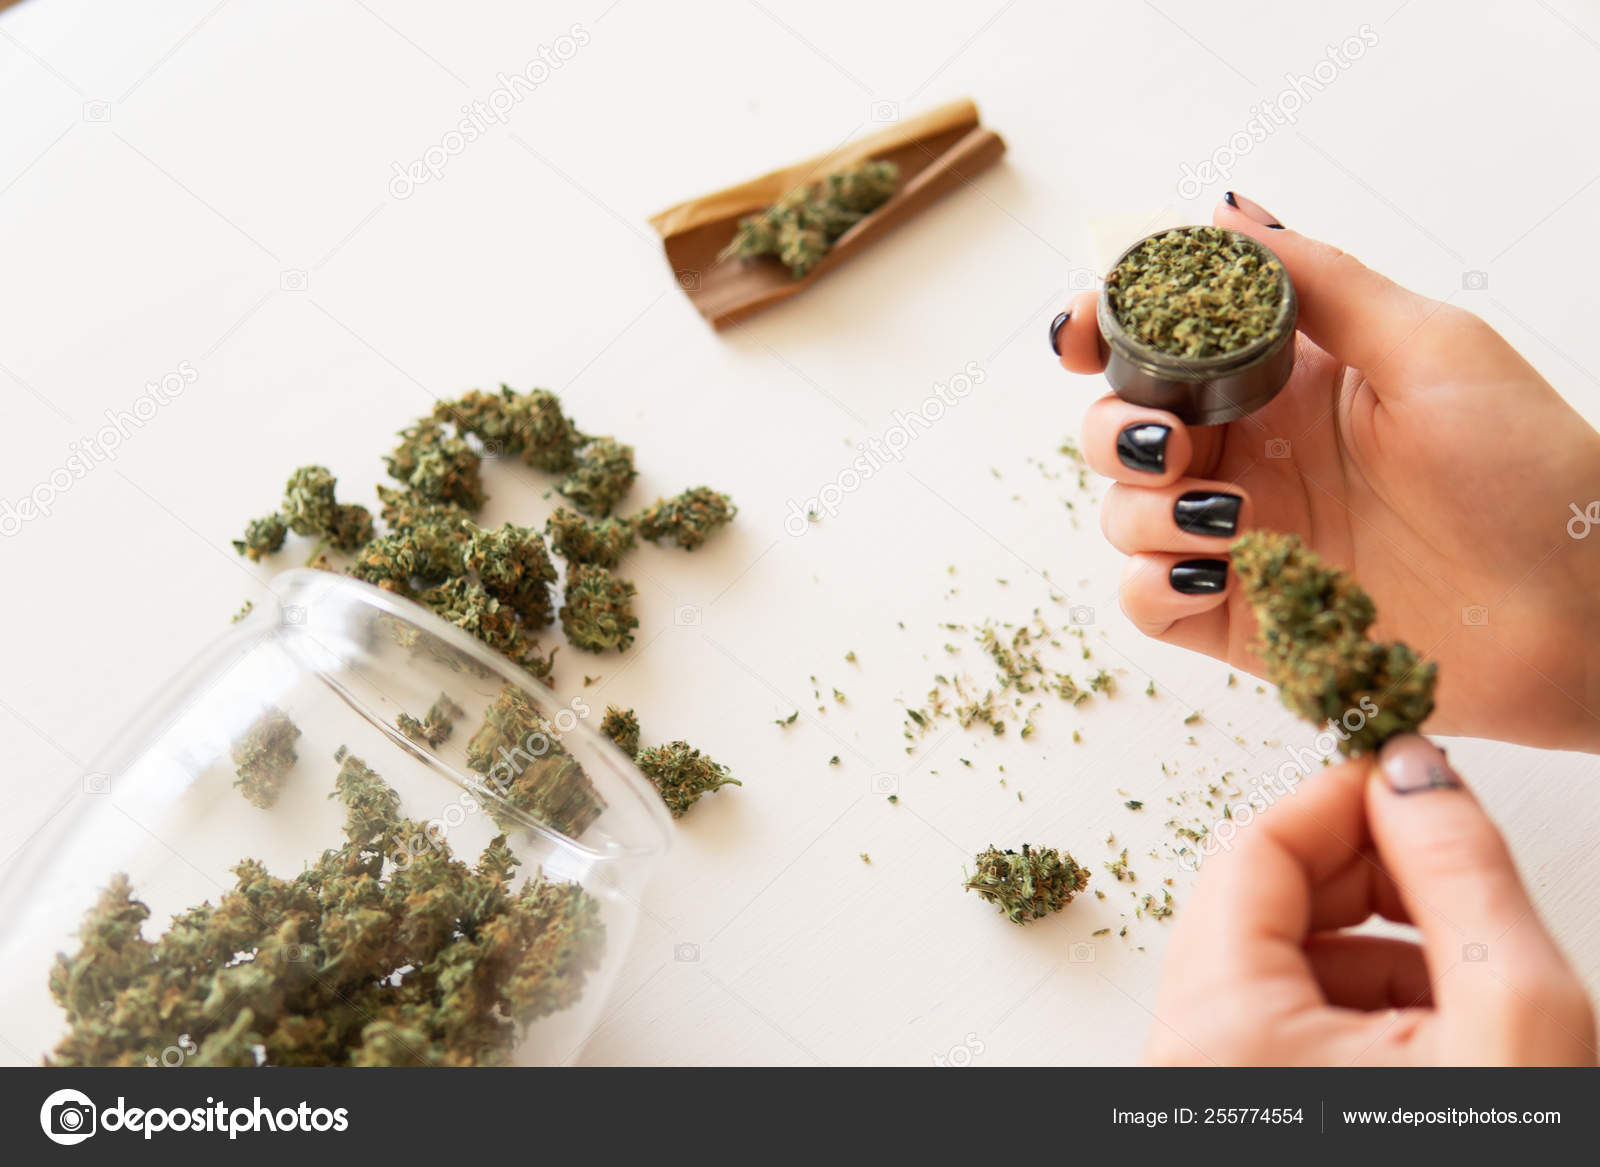 Close up of marijuana blunt with grinder. Woman rolling a cannabis